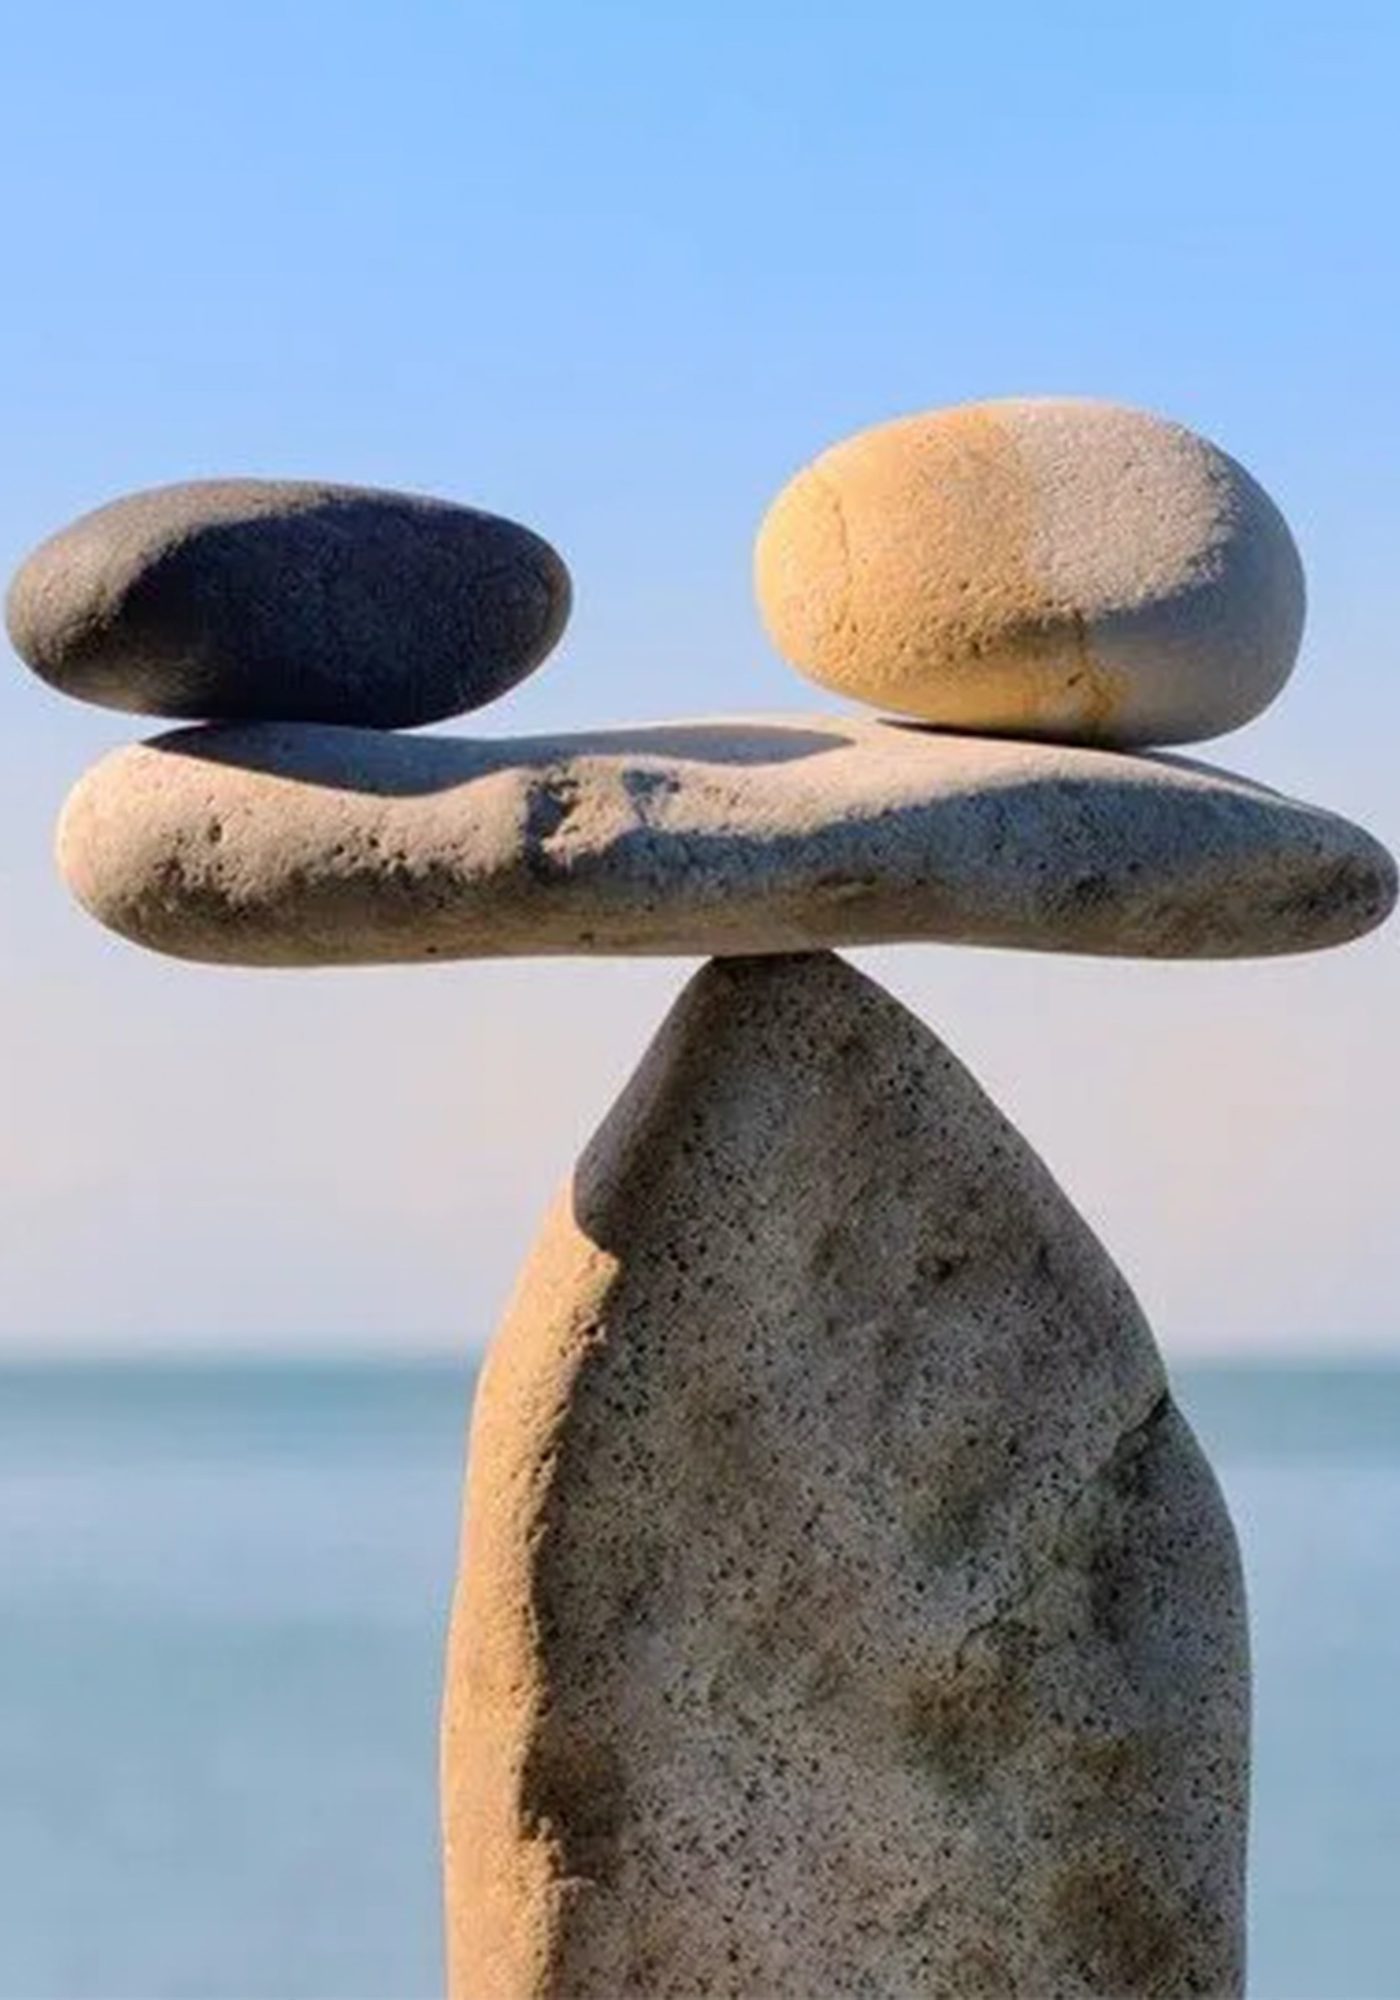 An image of gently balanced stacked stones.